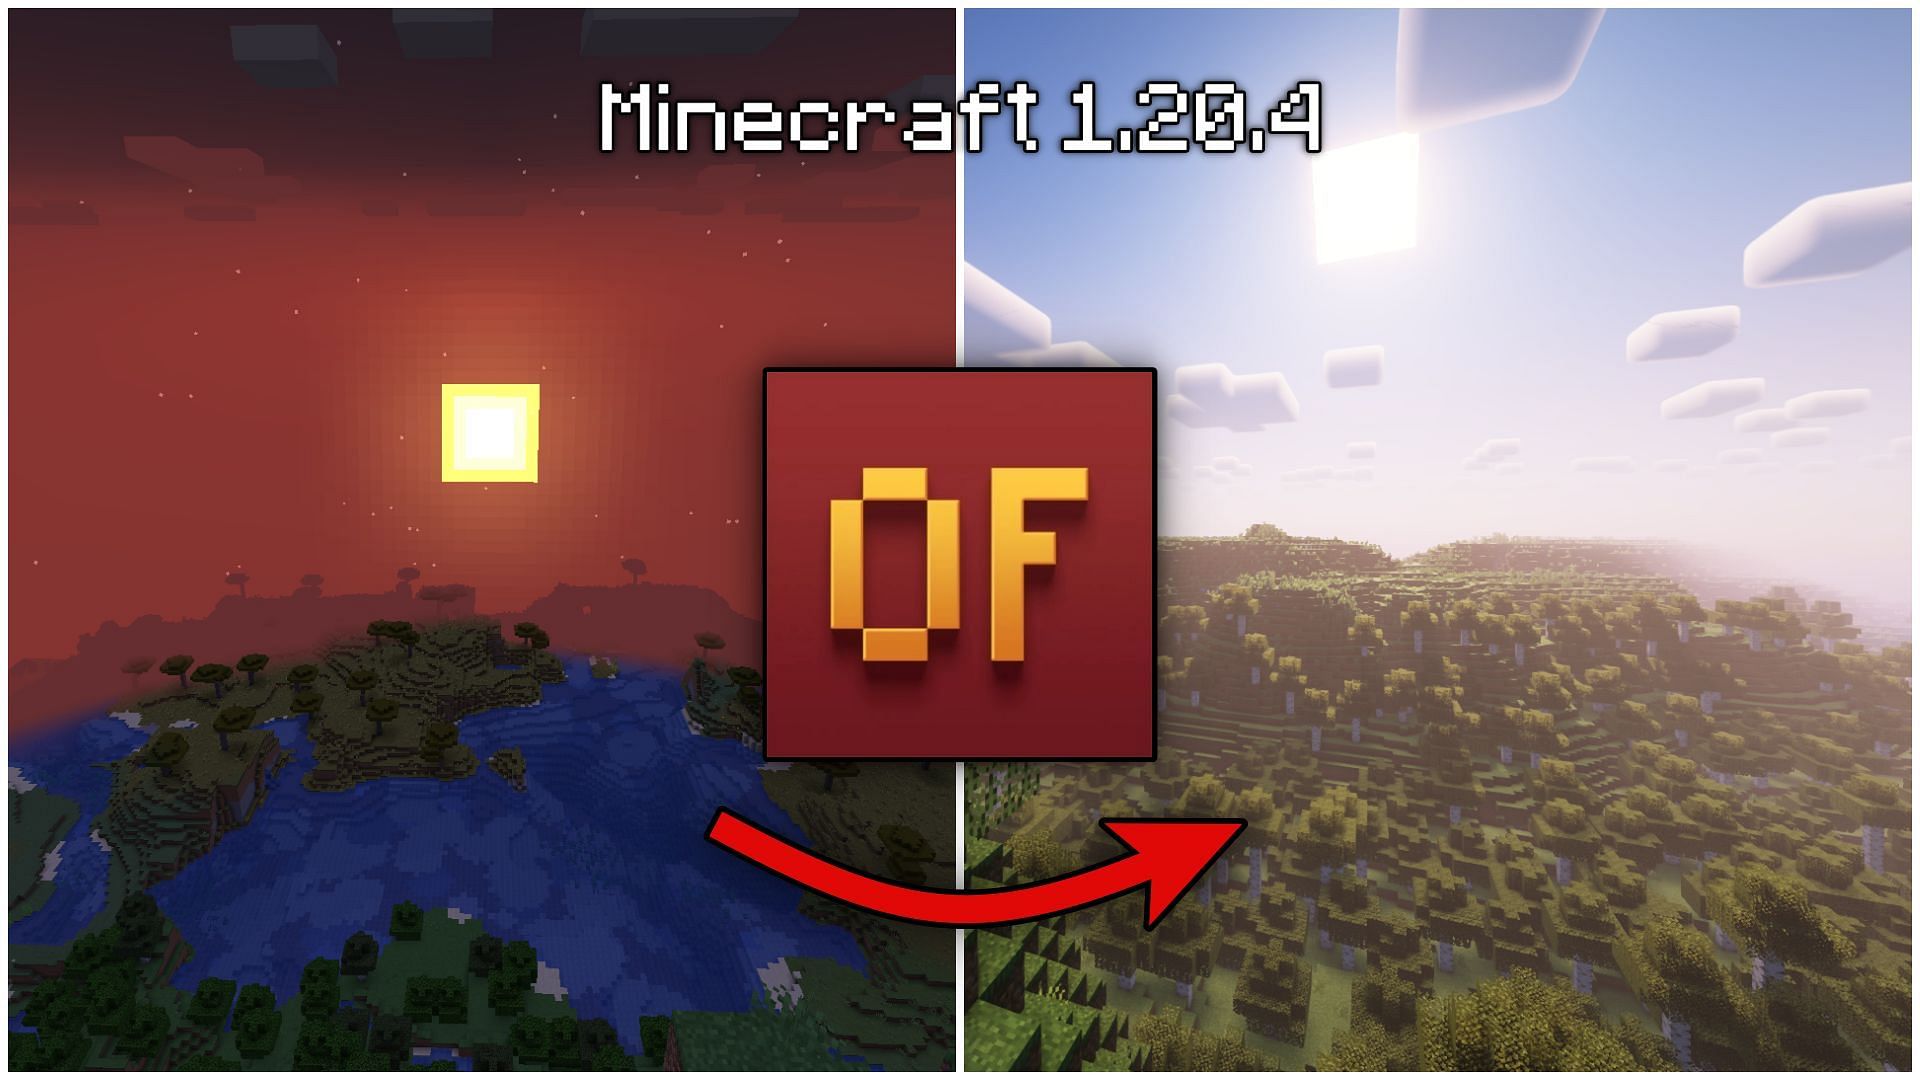 Preview version of OptiFine is available for Minecraft 1.20.4 (Image via Sportskeeda)